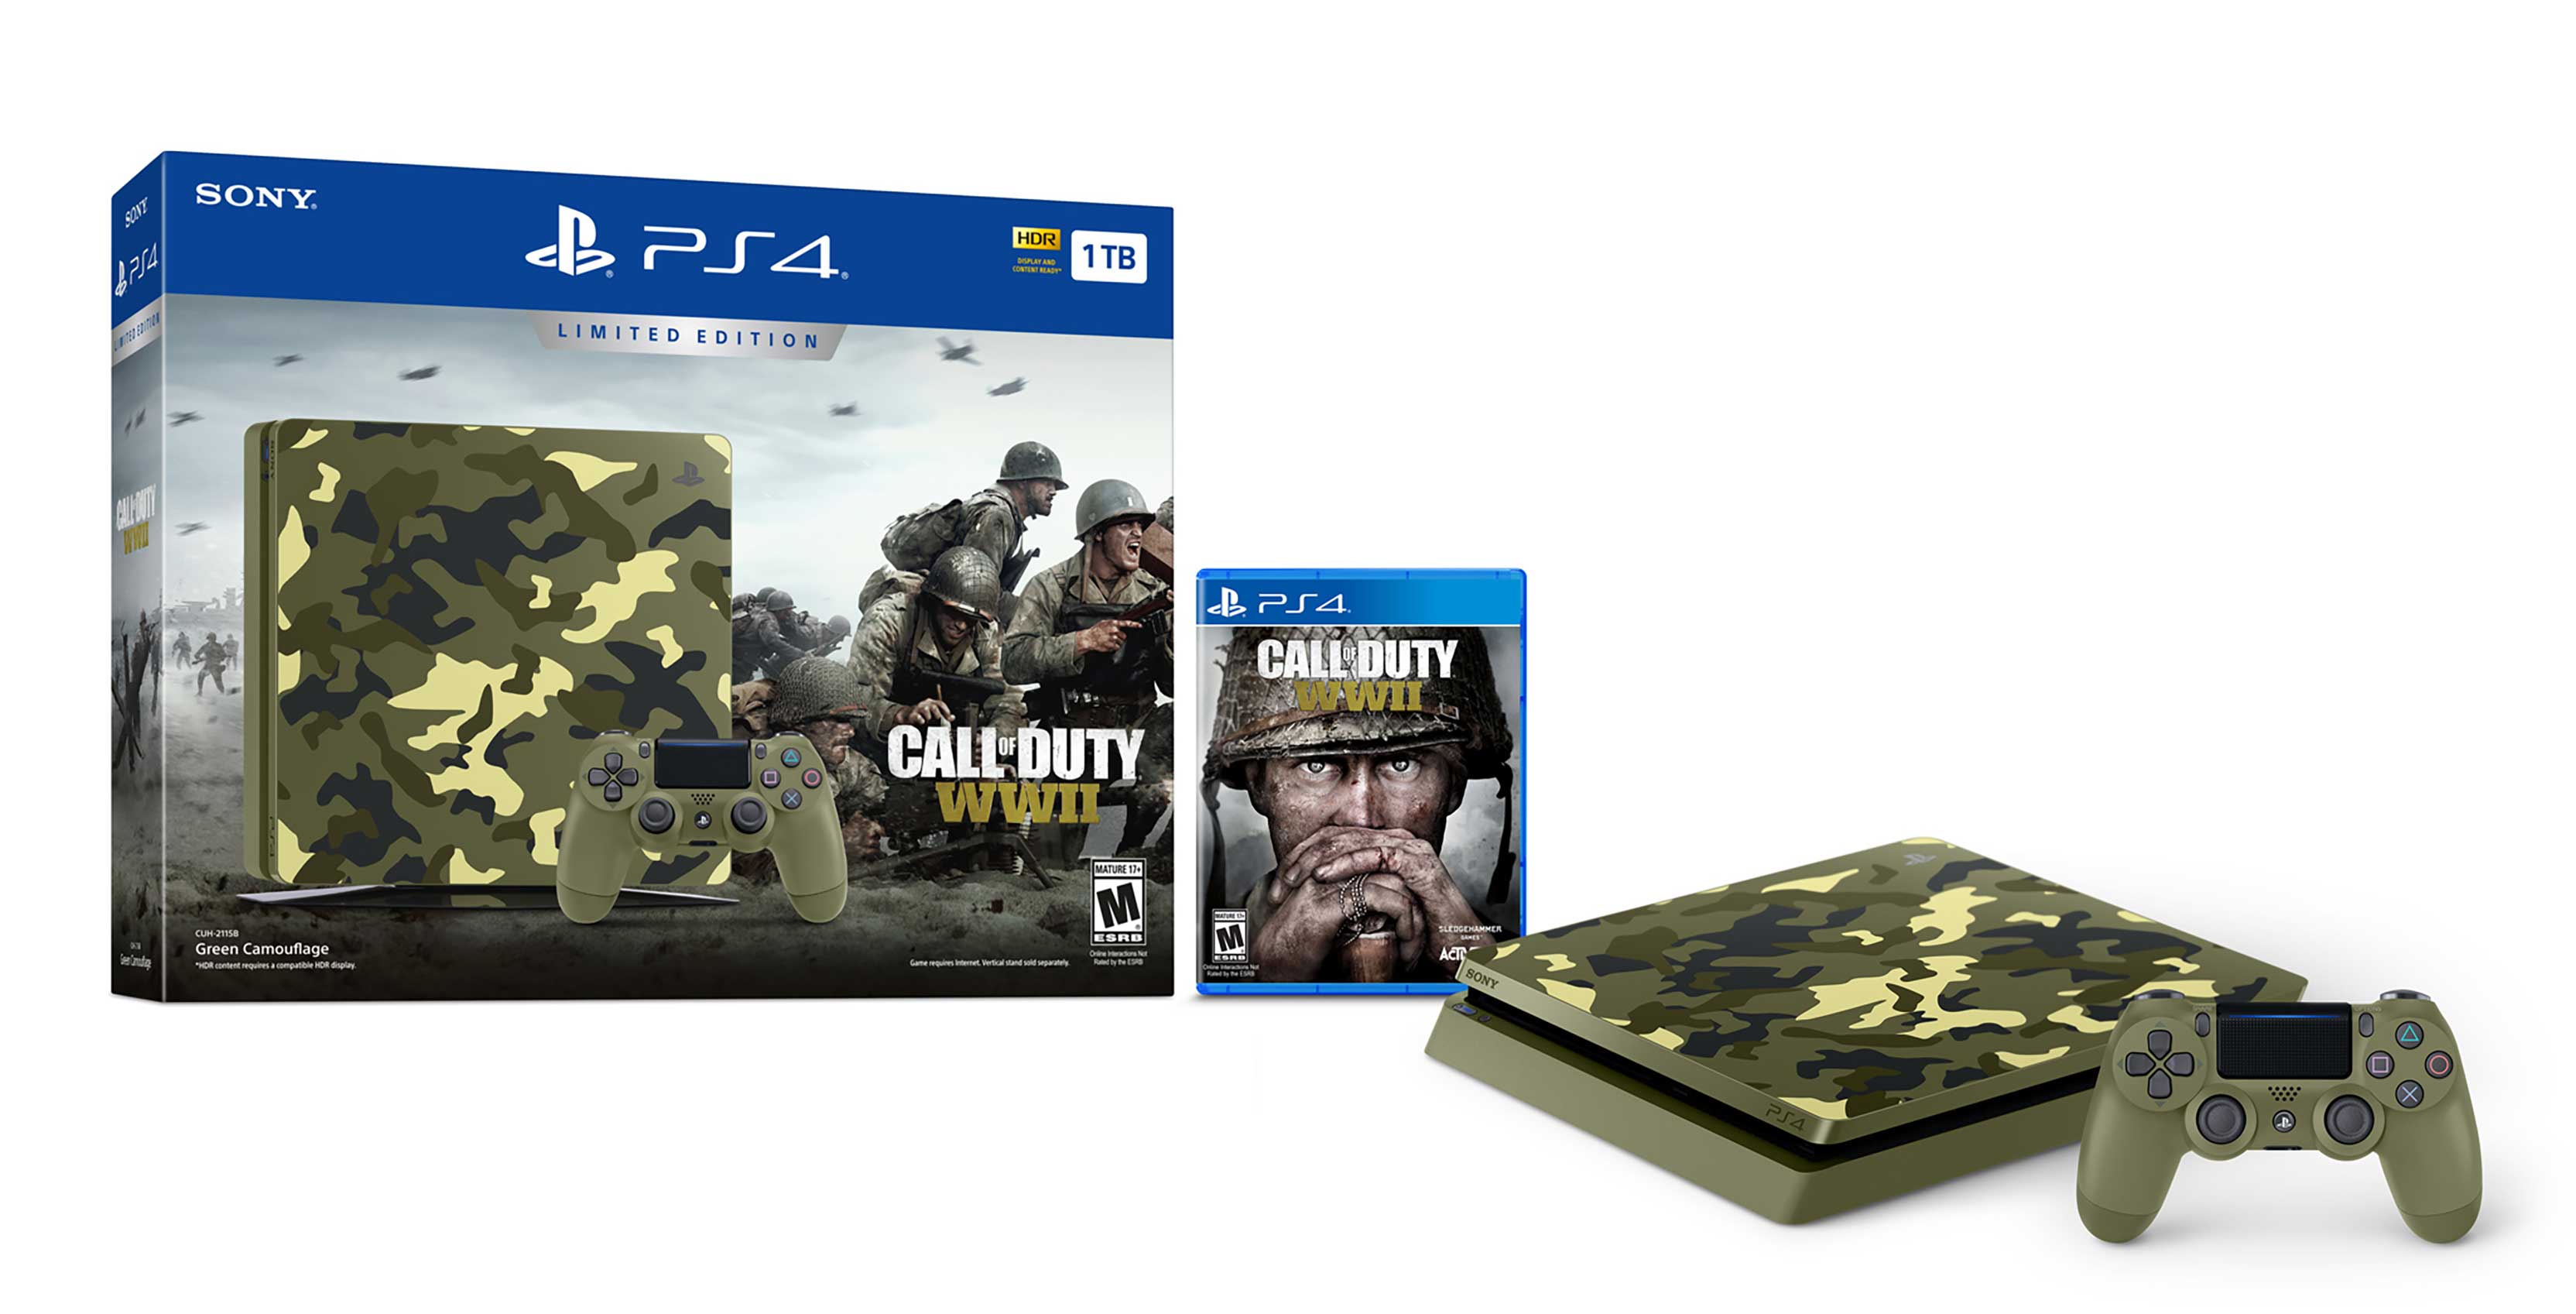 Ww2 ps4. PLAYSTATION 4 Slim Call of Duty Limited Edition. Call of Duty WWII ПС 4. Call of Duty ww2 на пс4. PLAYSTATION 4 Call of Duty ww2.